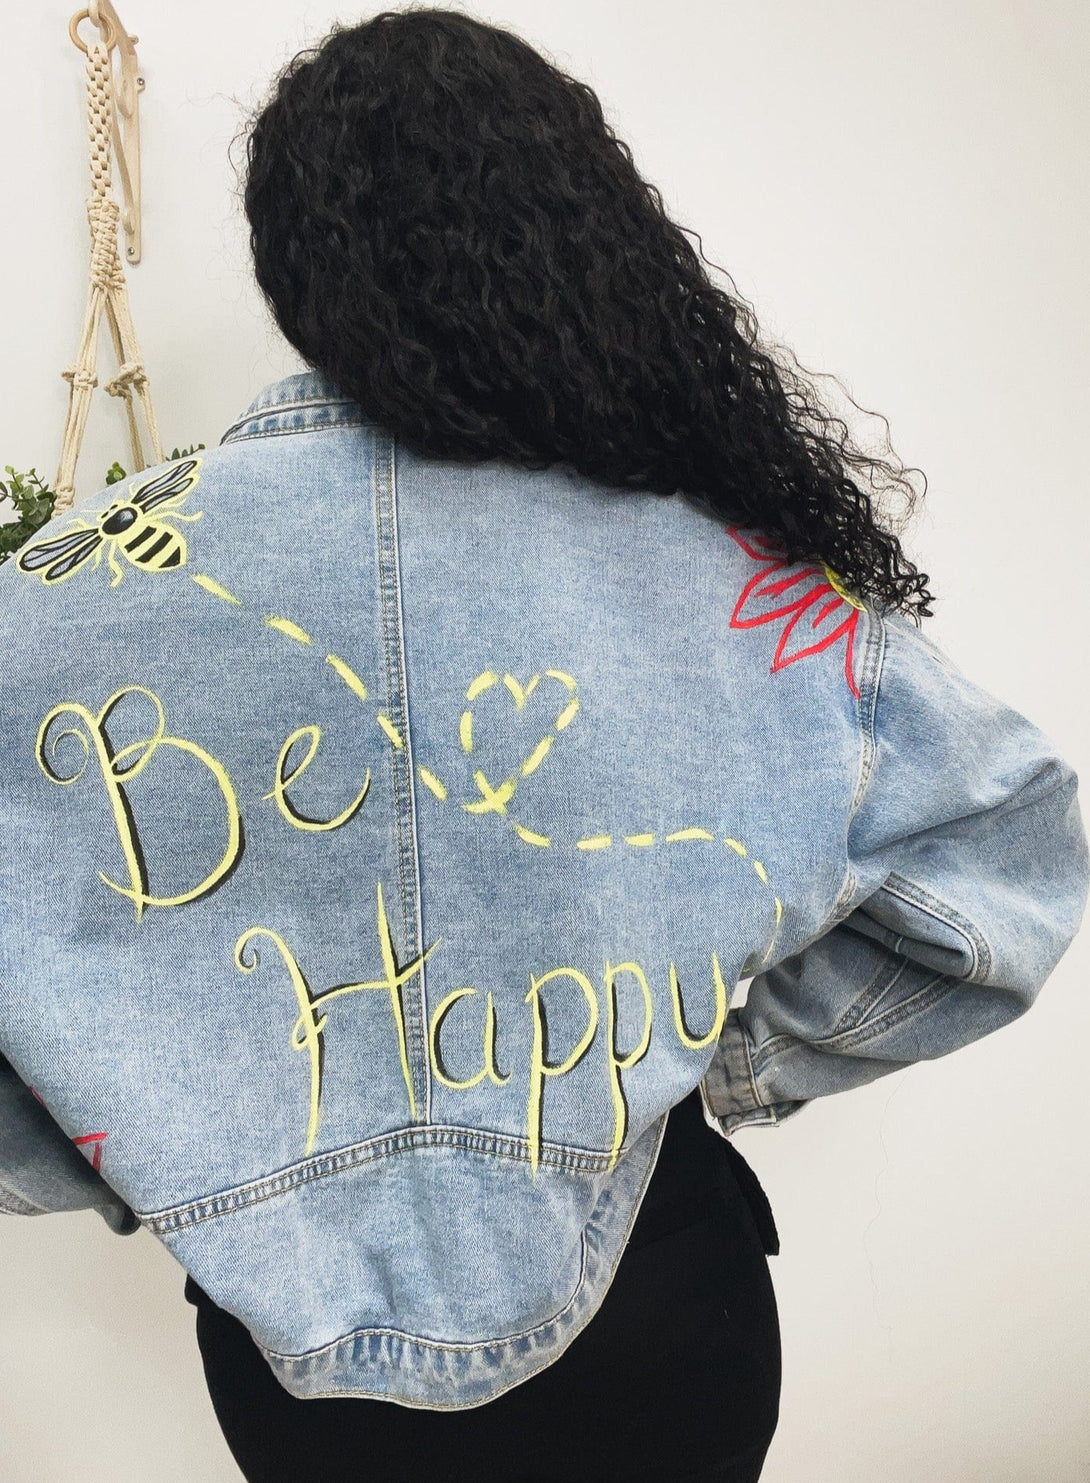 Bee Happy Hand Painted Distressed Denim Jacket Size Small